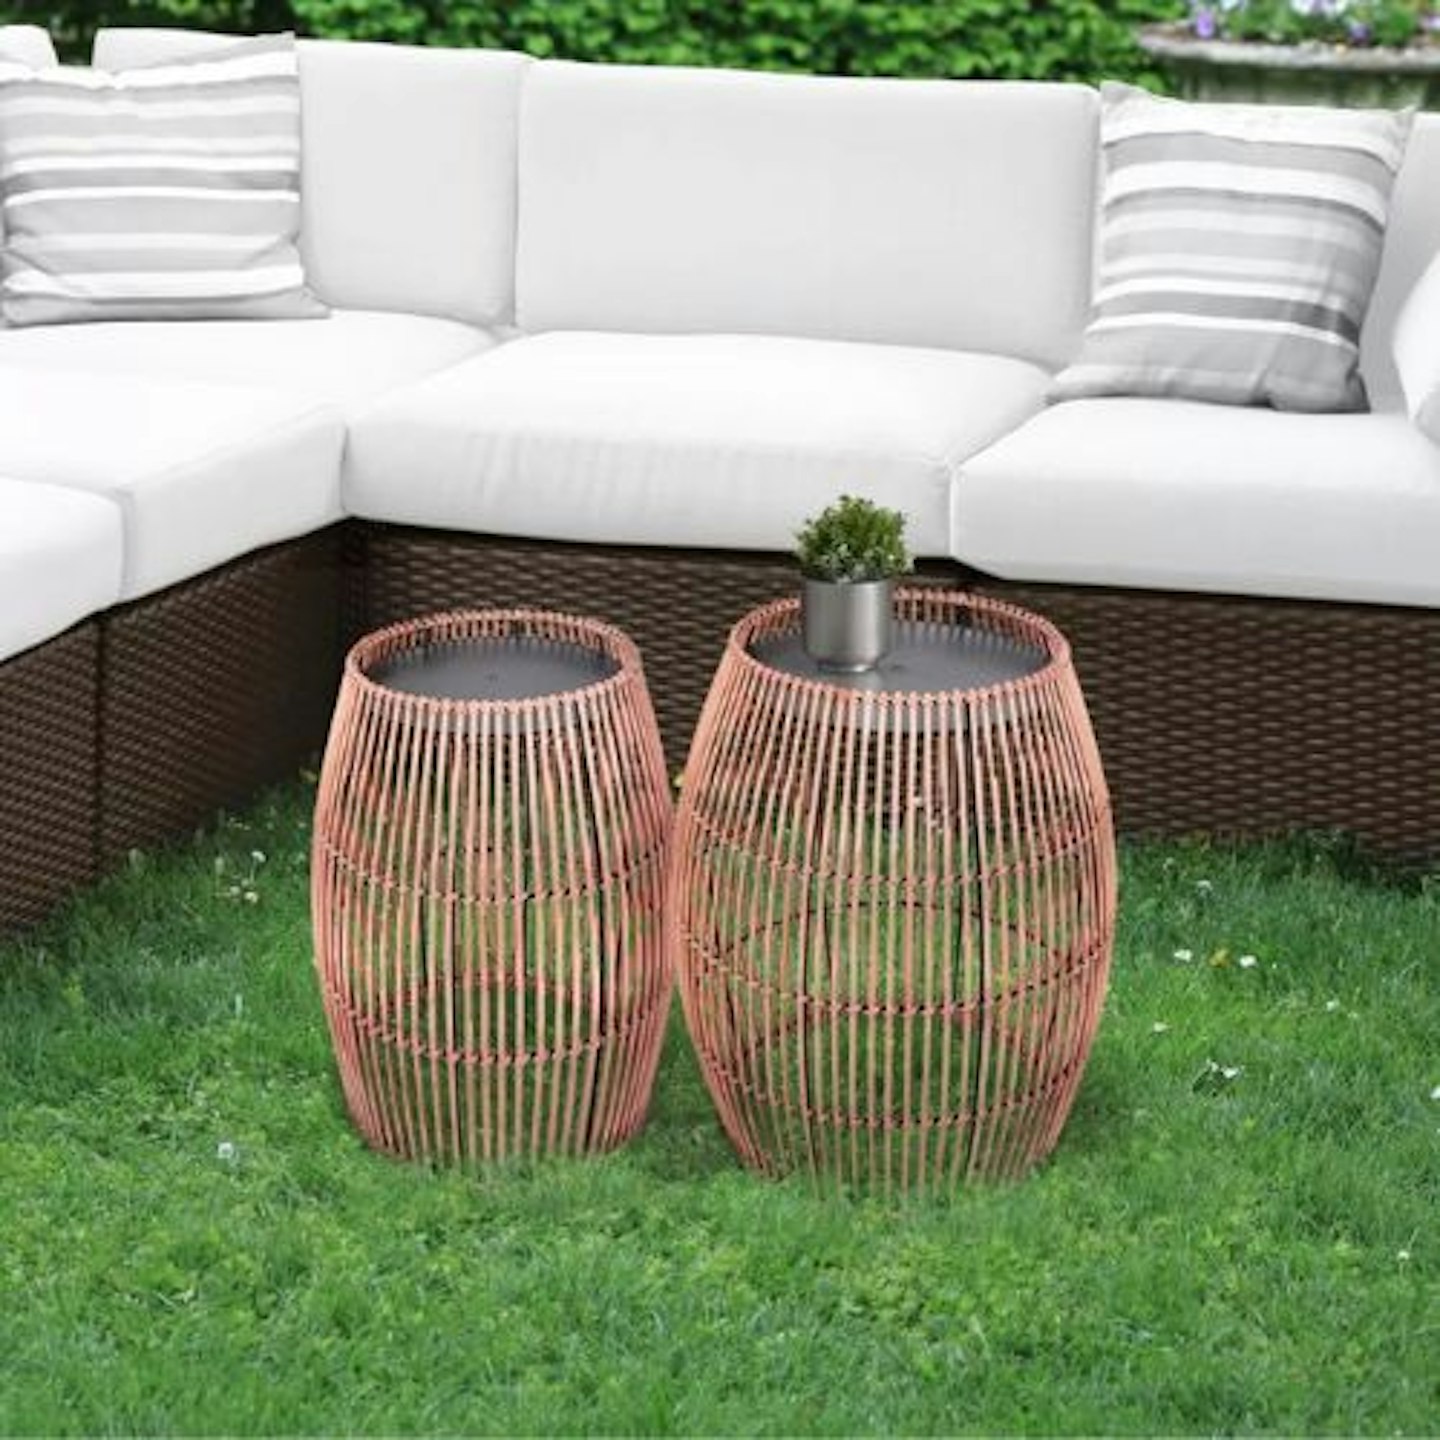 Teamson Home Outdoor Garden Furniture Large Round Patio Side Table